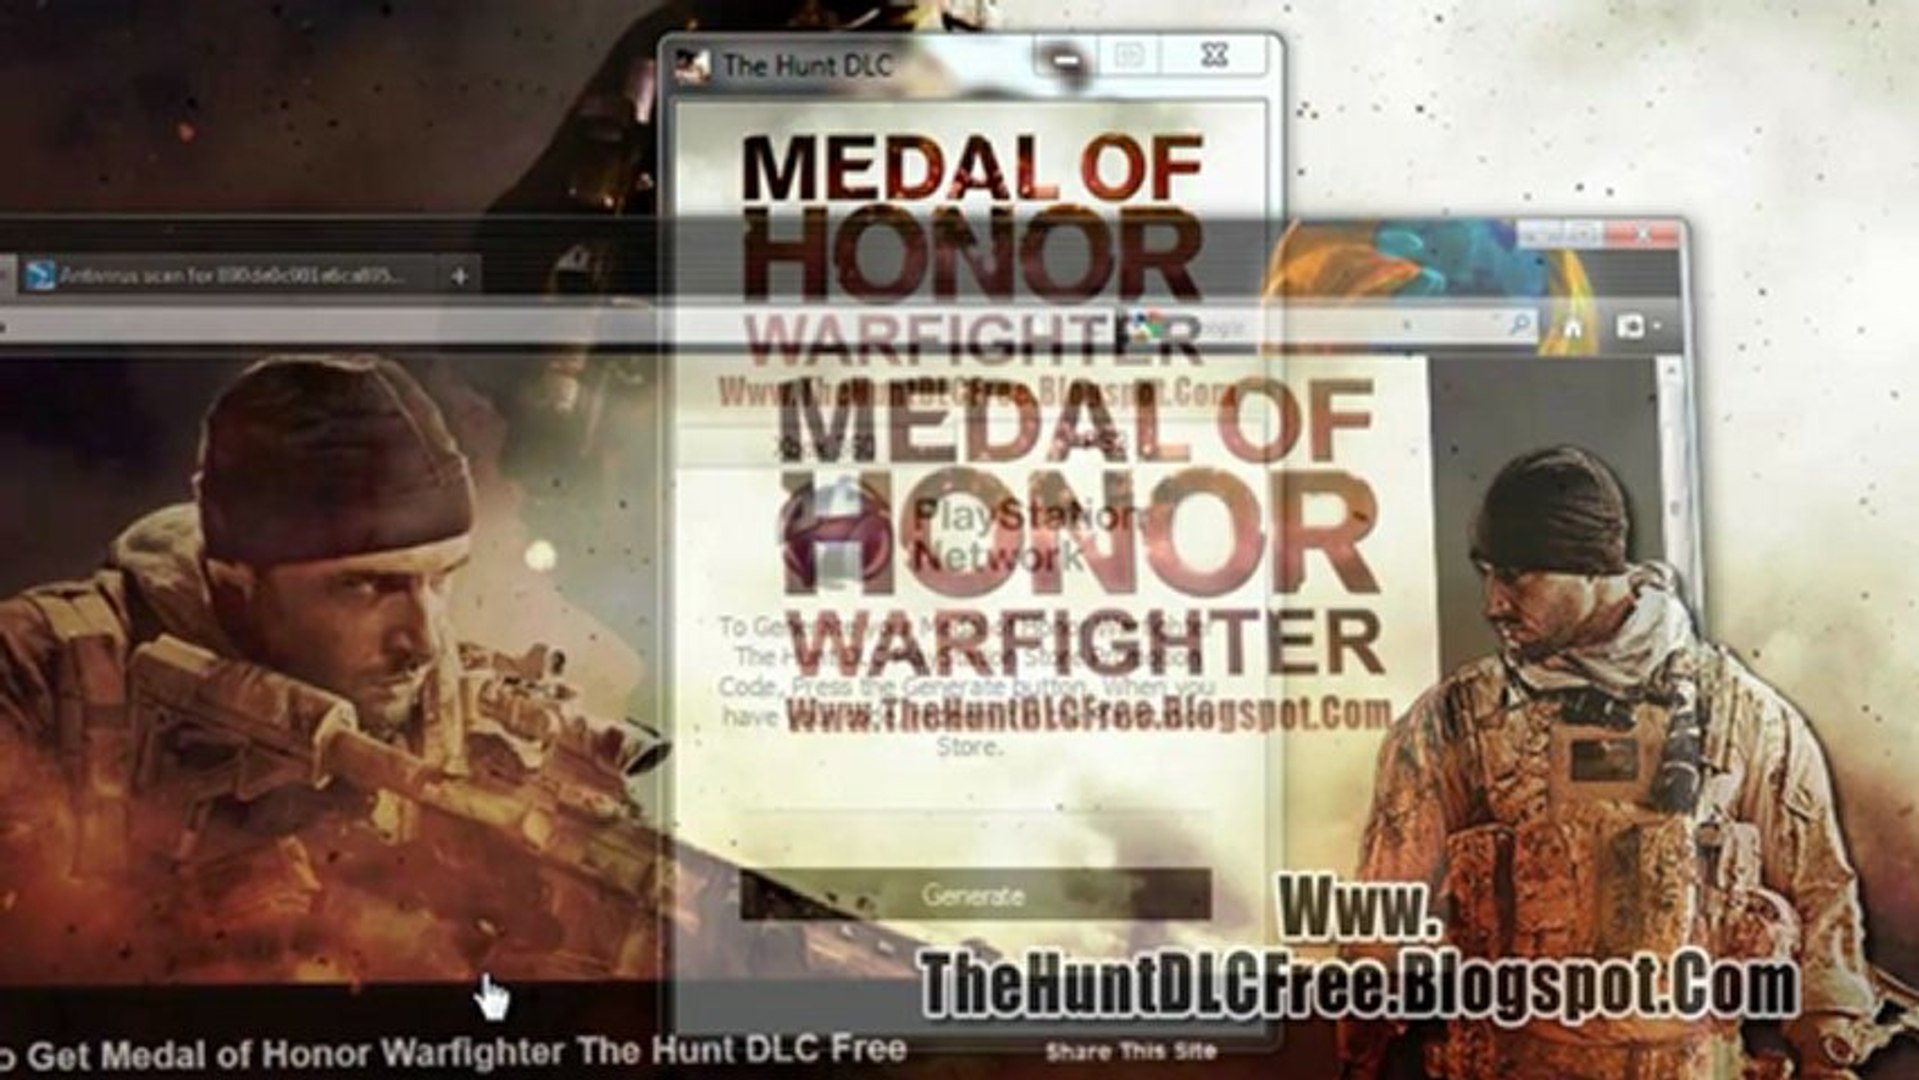 Warfighter free medal of honor Medal of